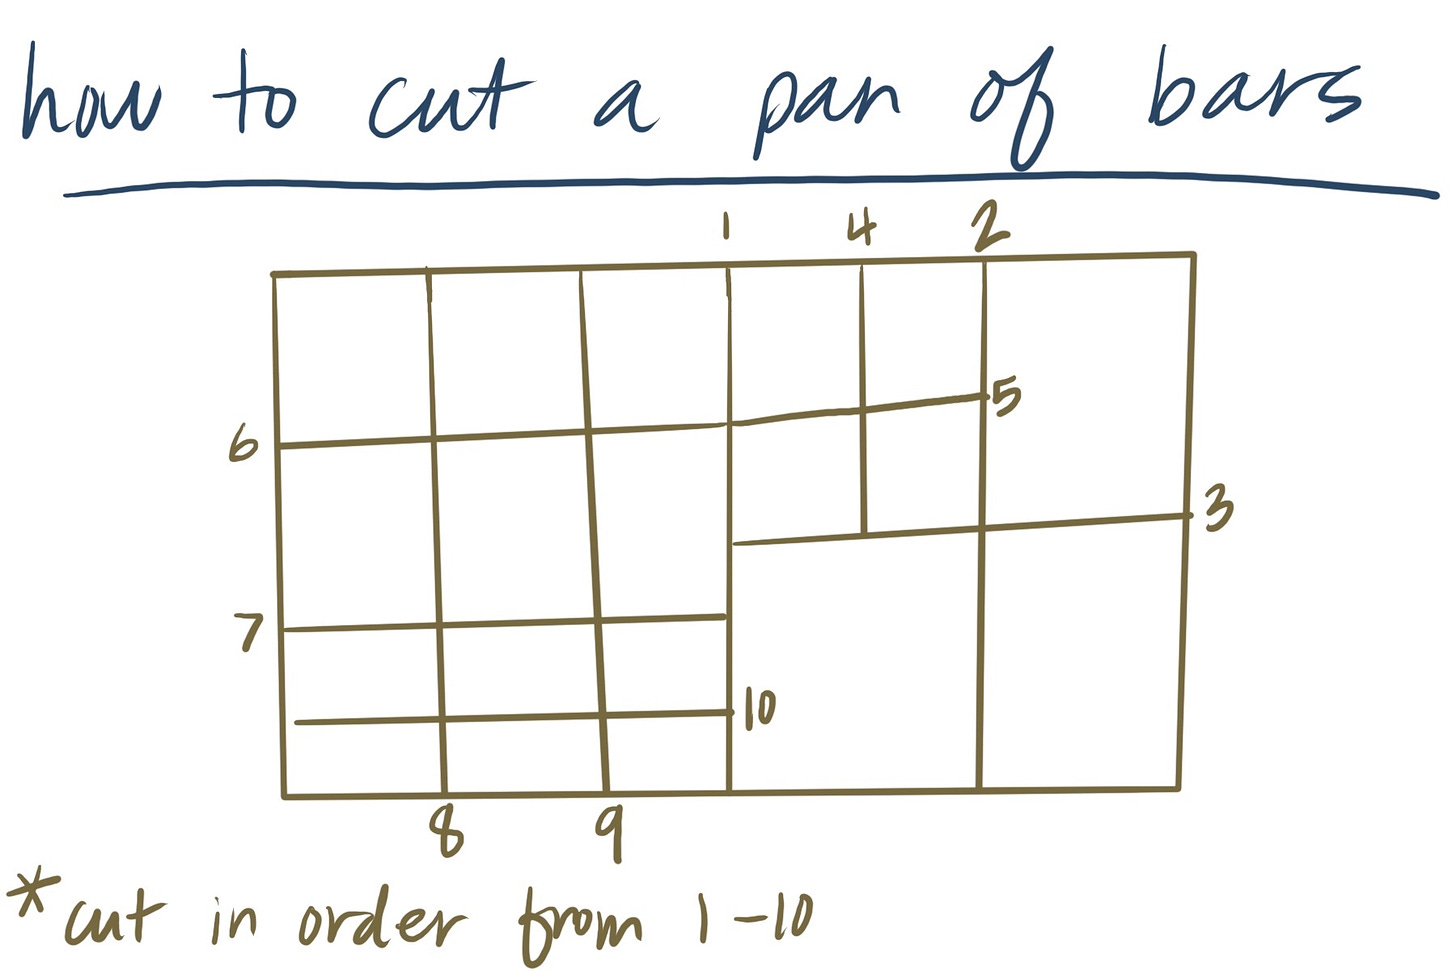 illustration of how to cut a pan of bars